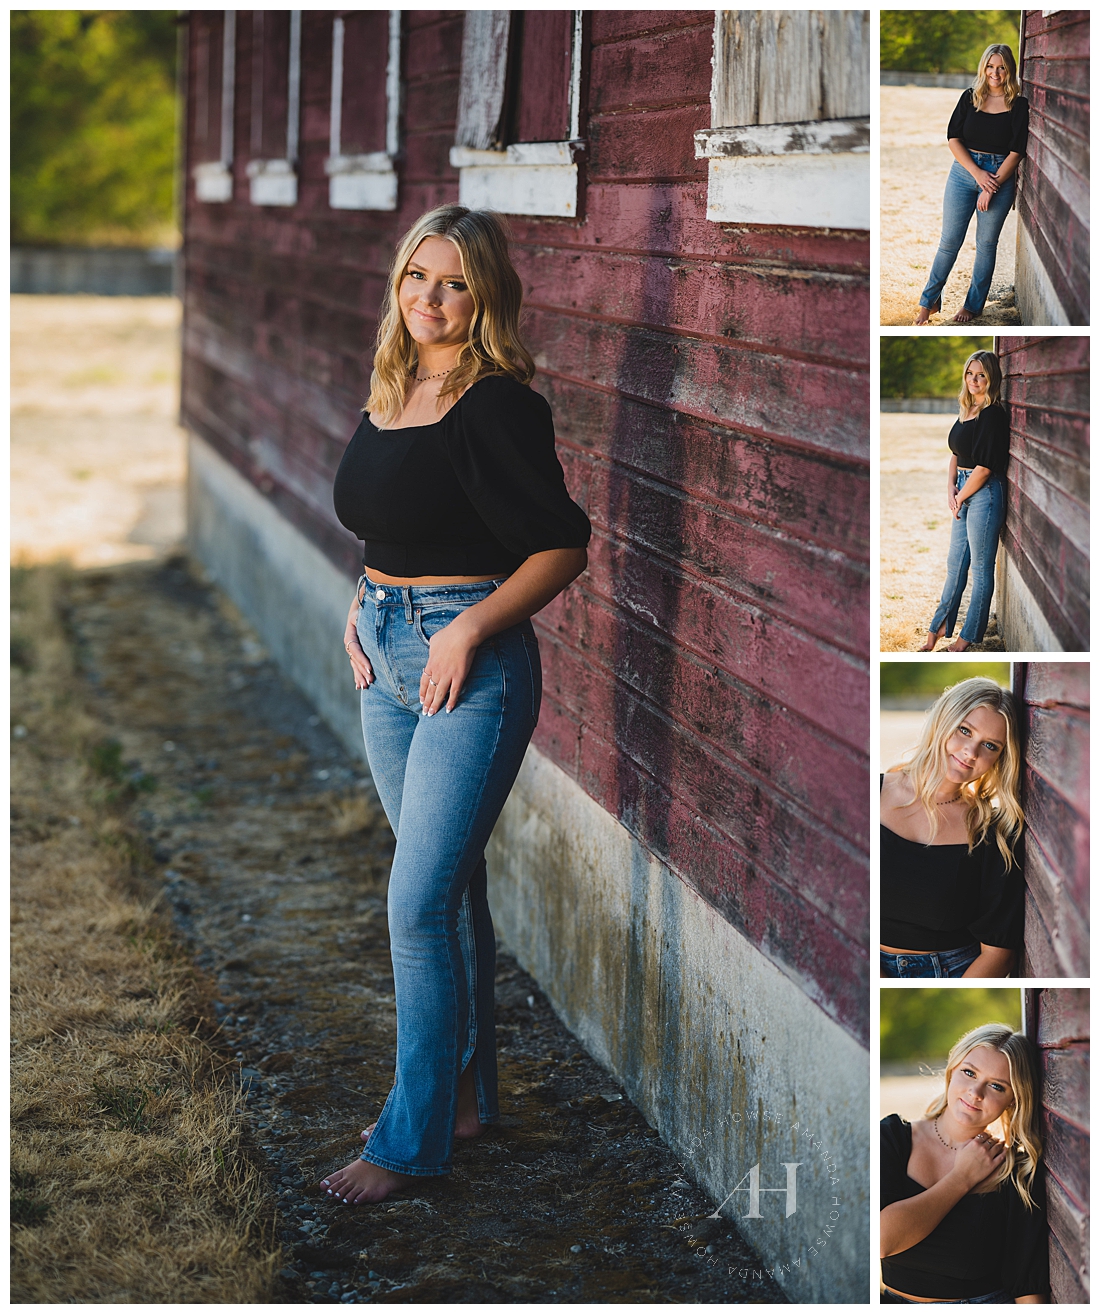 Barefoot and Blue Jean Summer Portraits | Senior Styles in Front of Red Barn, Black Top and Jeans Outfit Ideas | Photographed by the Best Tacoma Senior Photographer Amanda Howse Photography